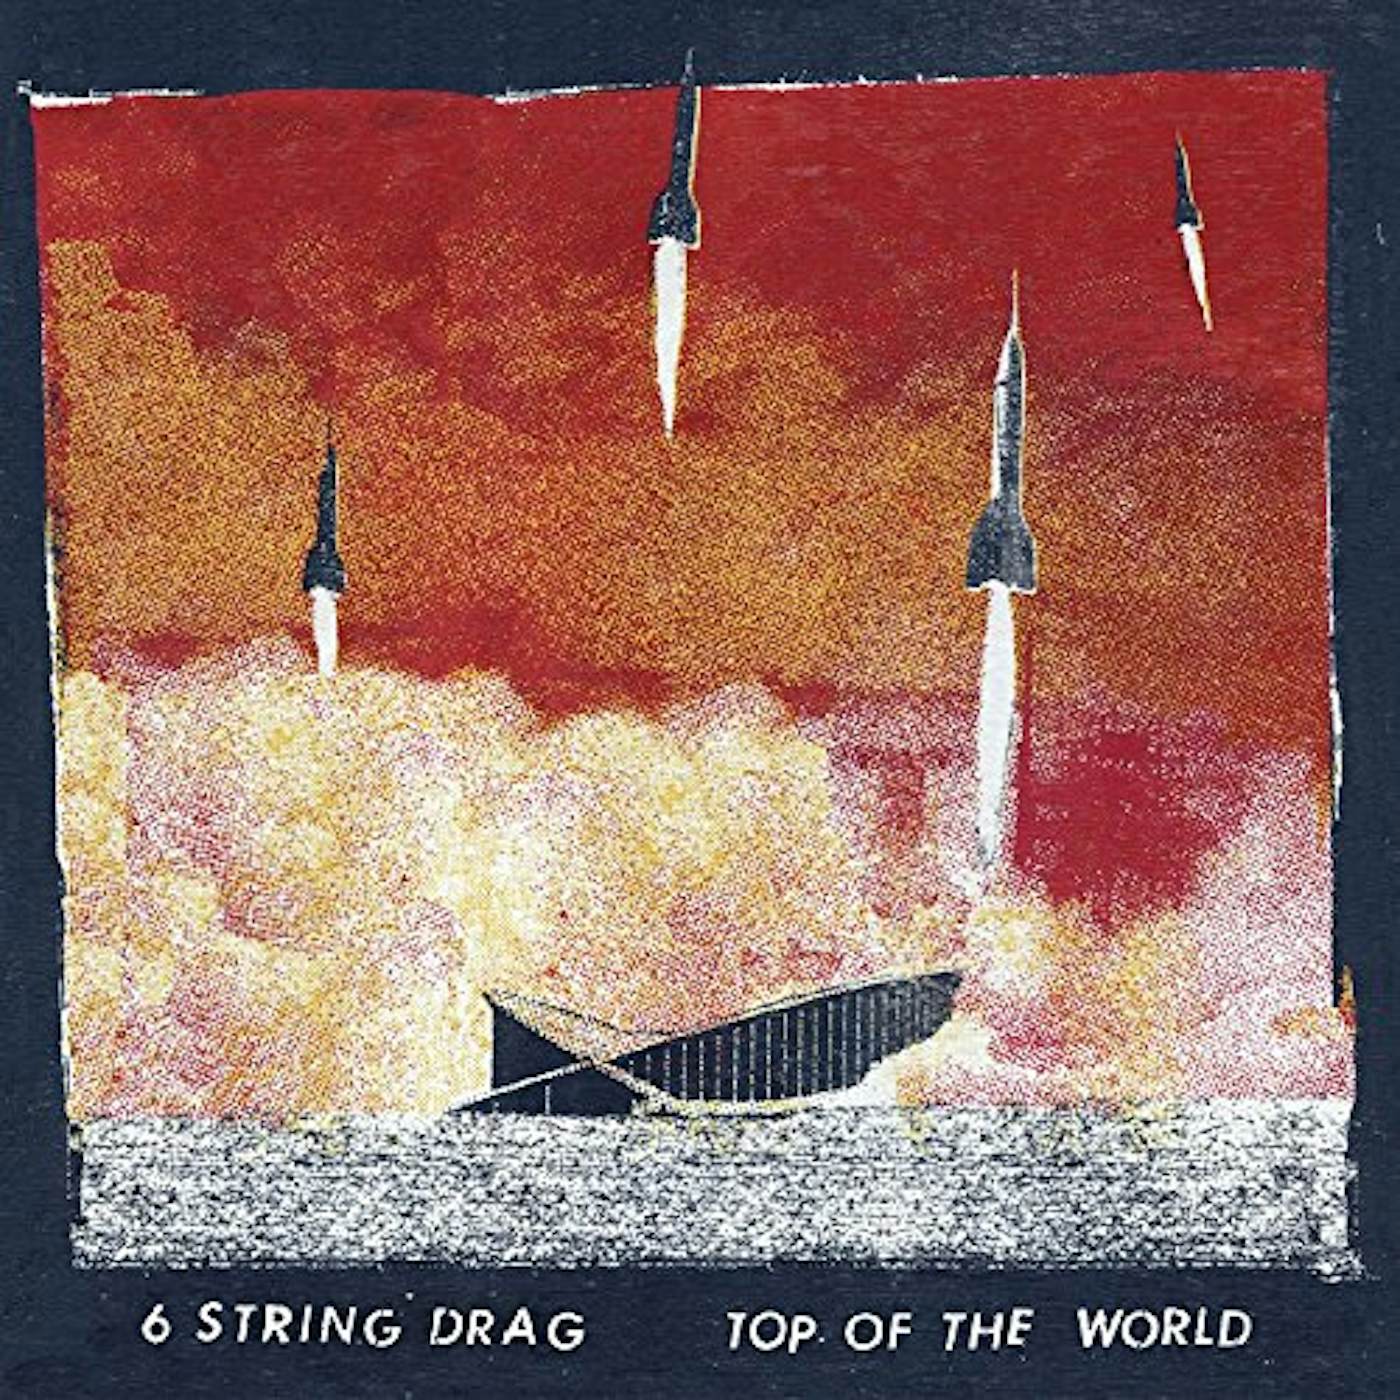 6 String Drag Top of the World Vinyl Record